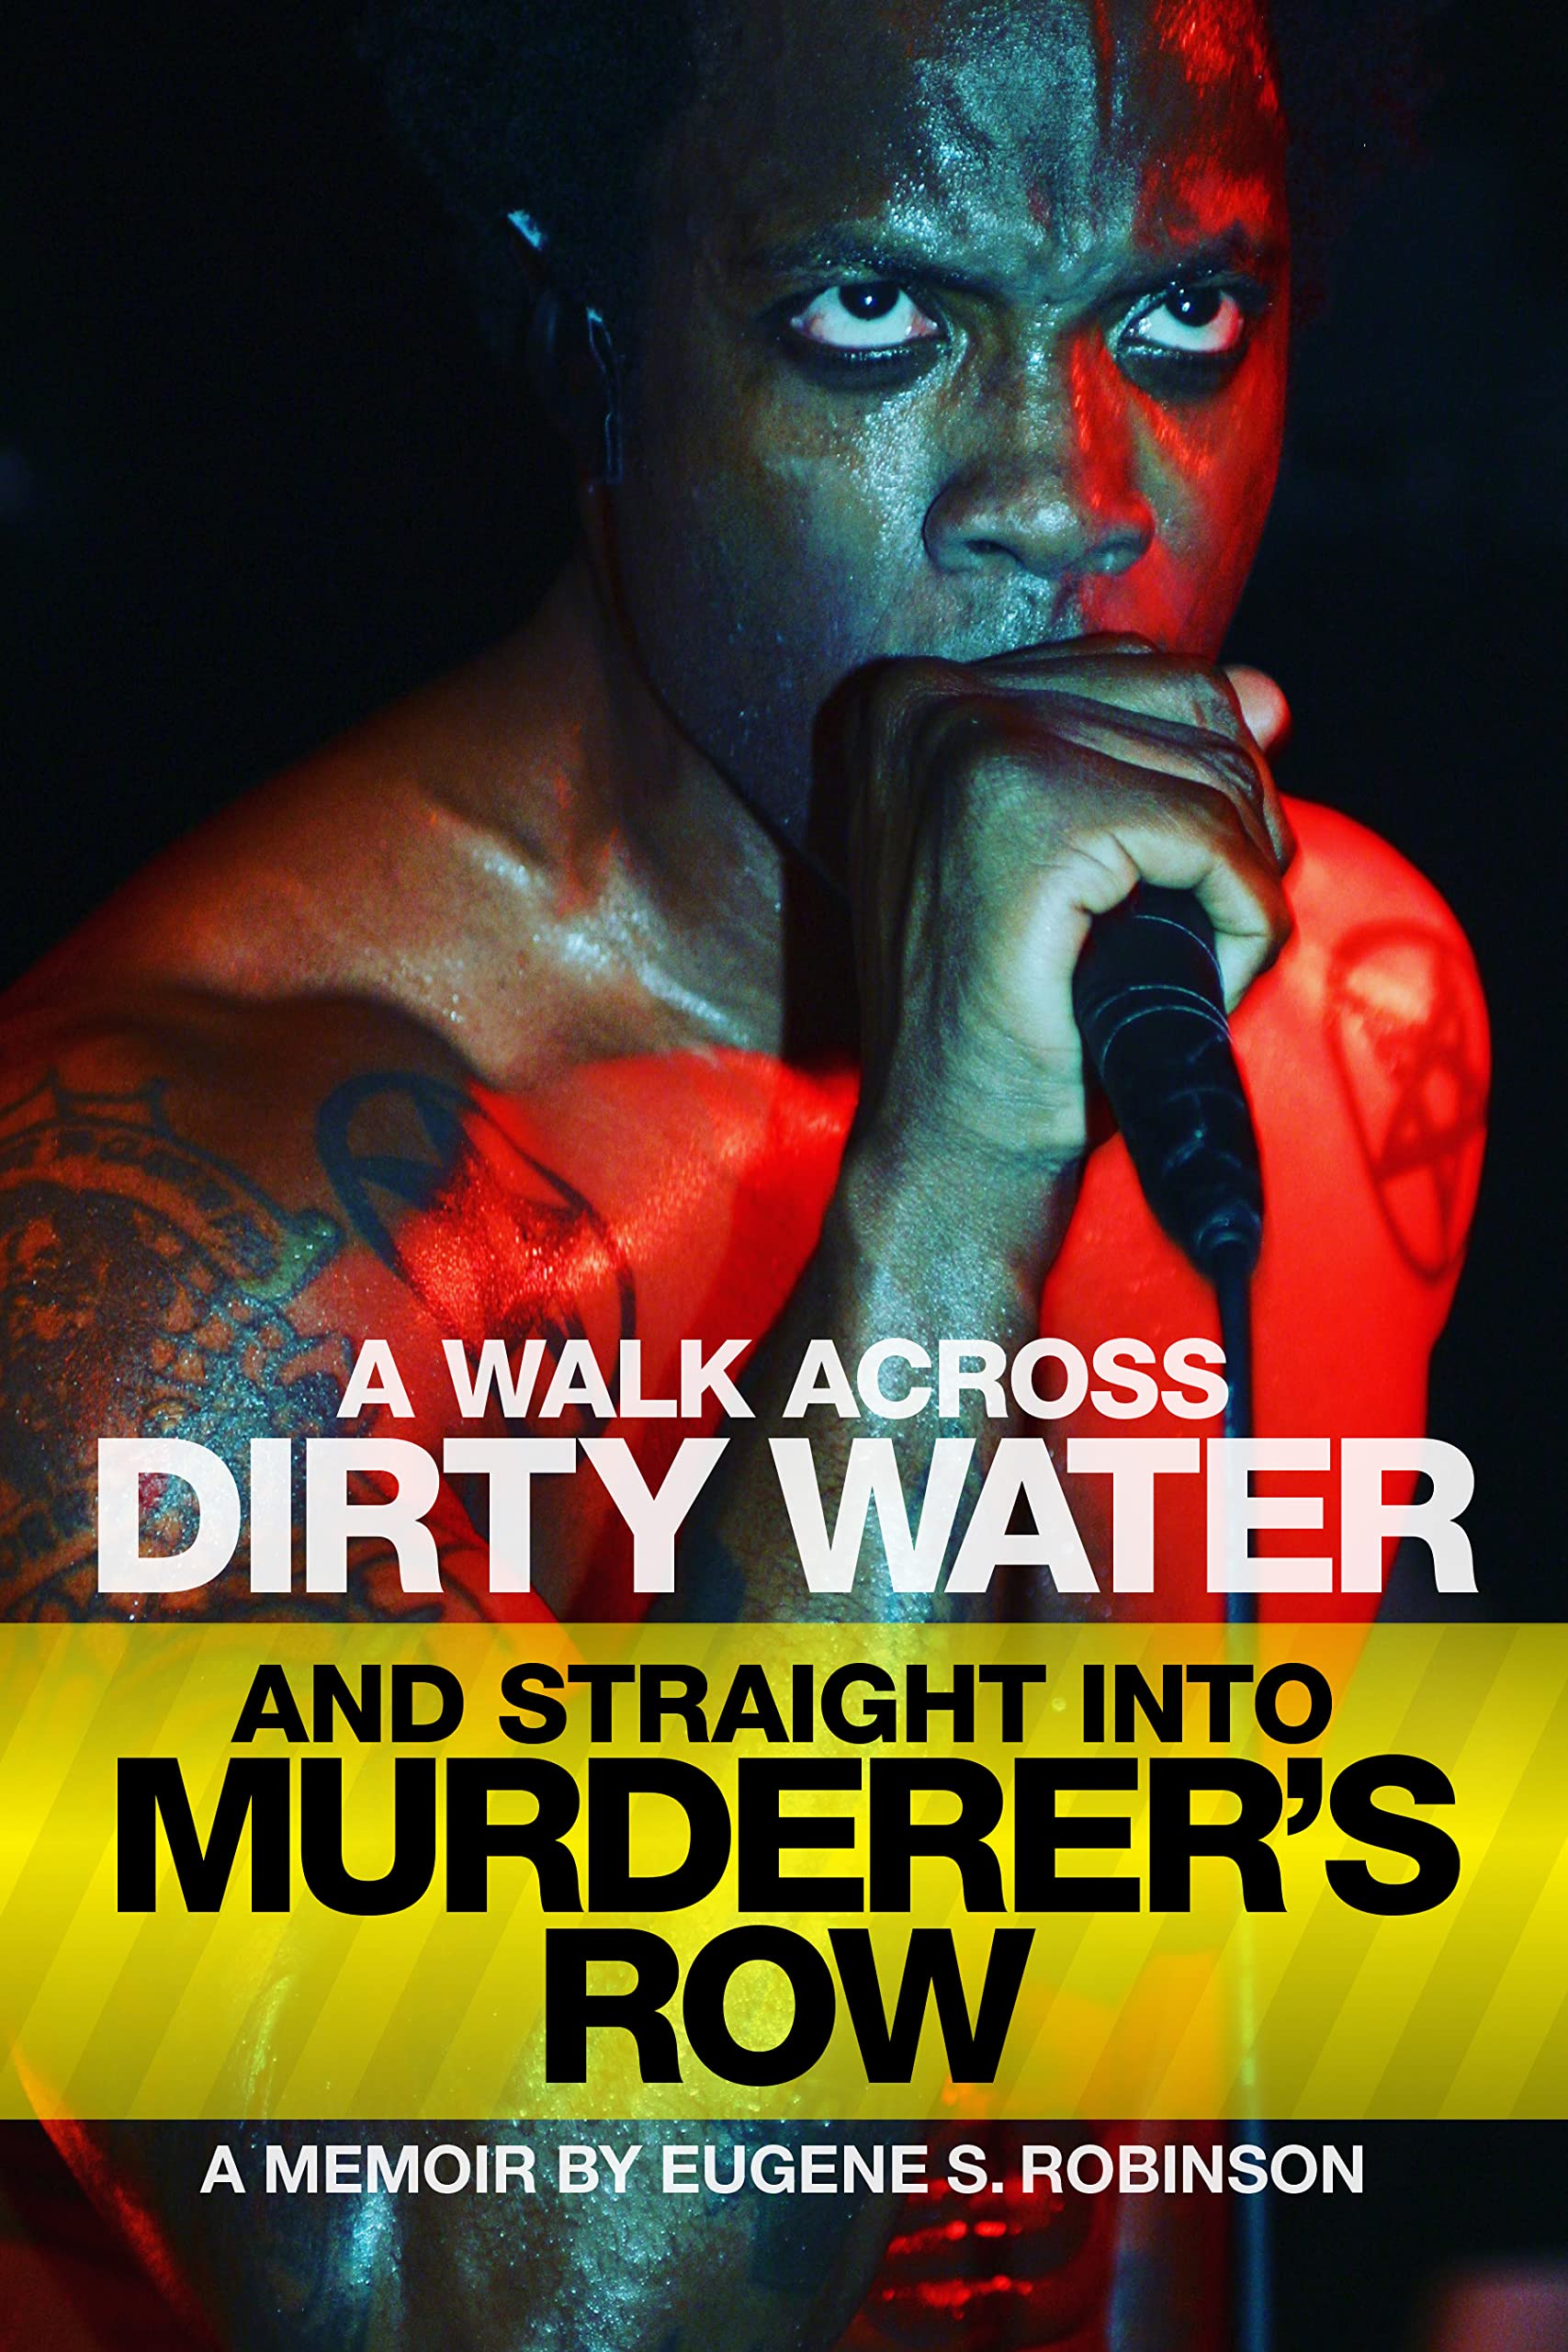 Book Talk: A Walk Across Dirty Water and Straight Into Murderer's Row: A Memoir by Eugene S. Robinson in conversation with Lydia Lunch